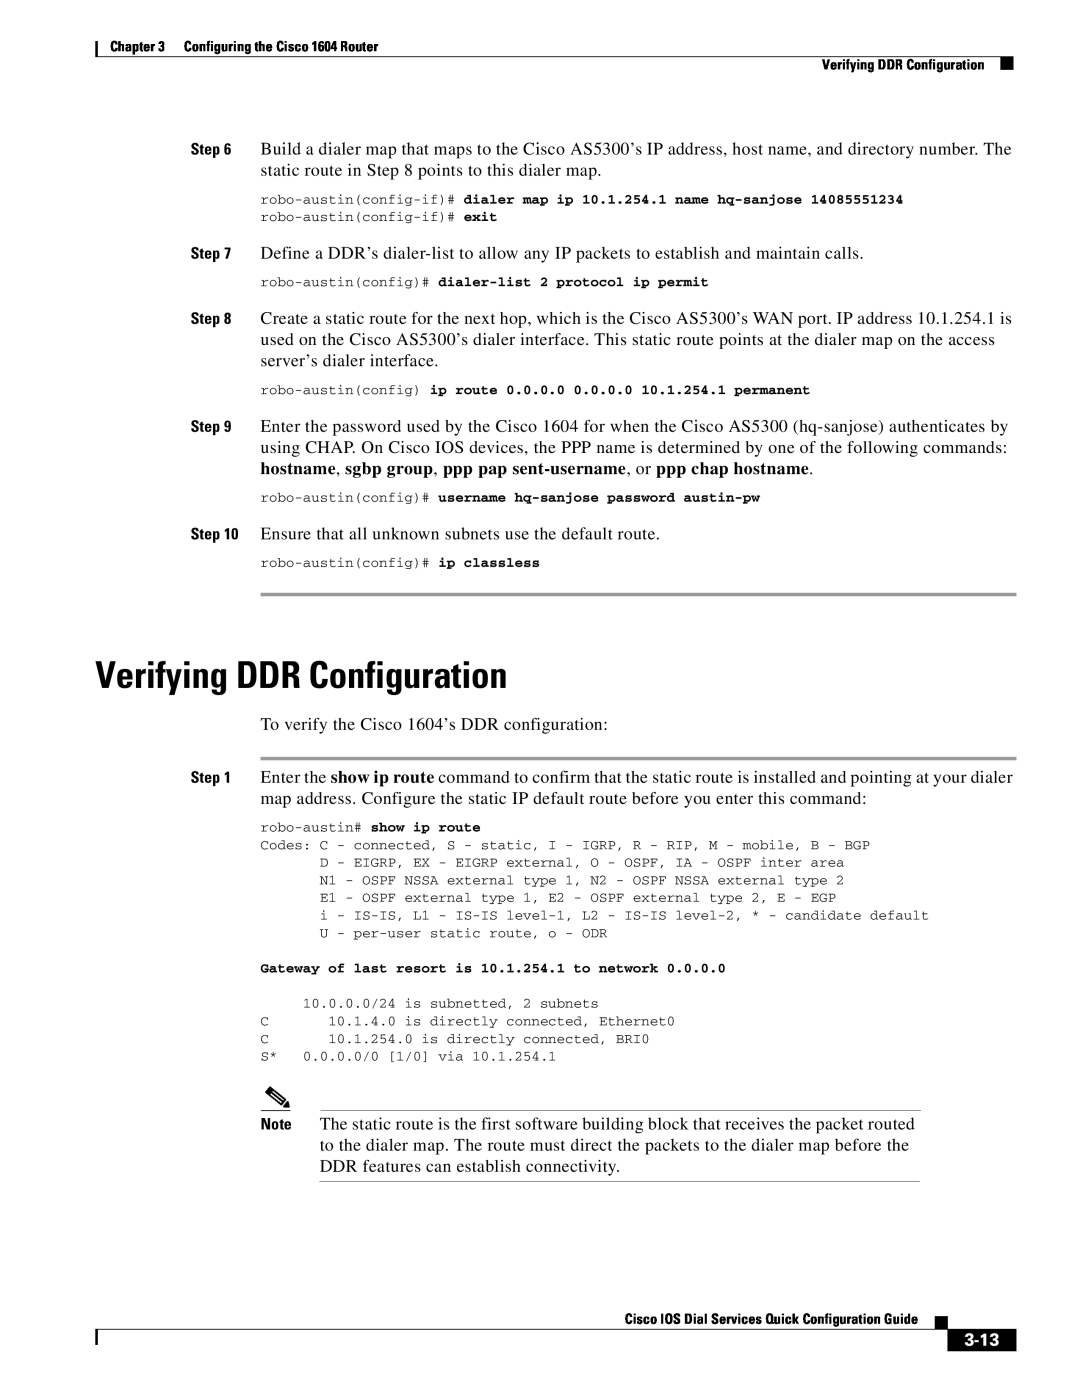 Cisco Systems 1604 manual Verifying DDR Configuration, 3-13 